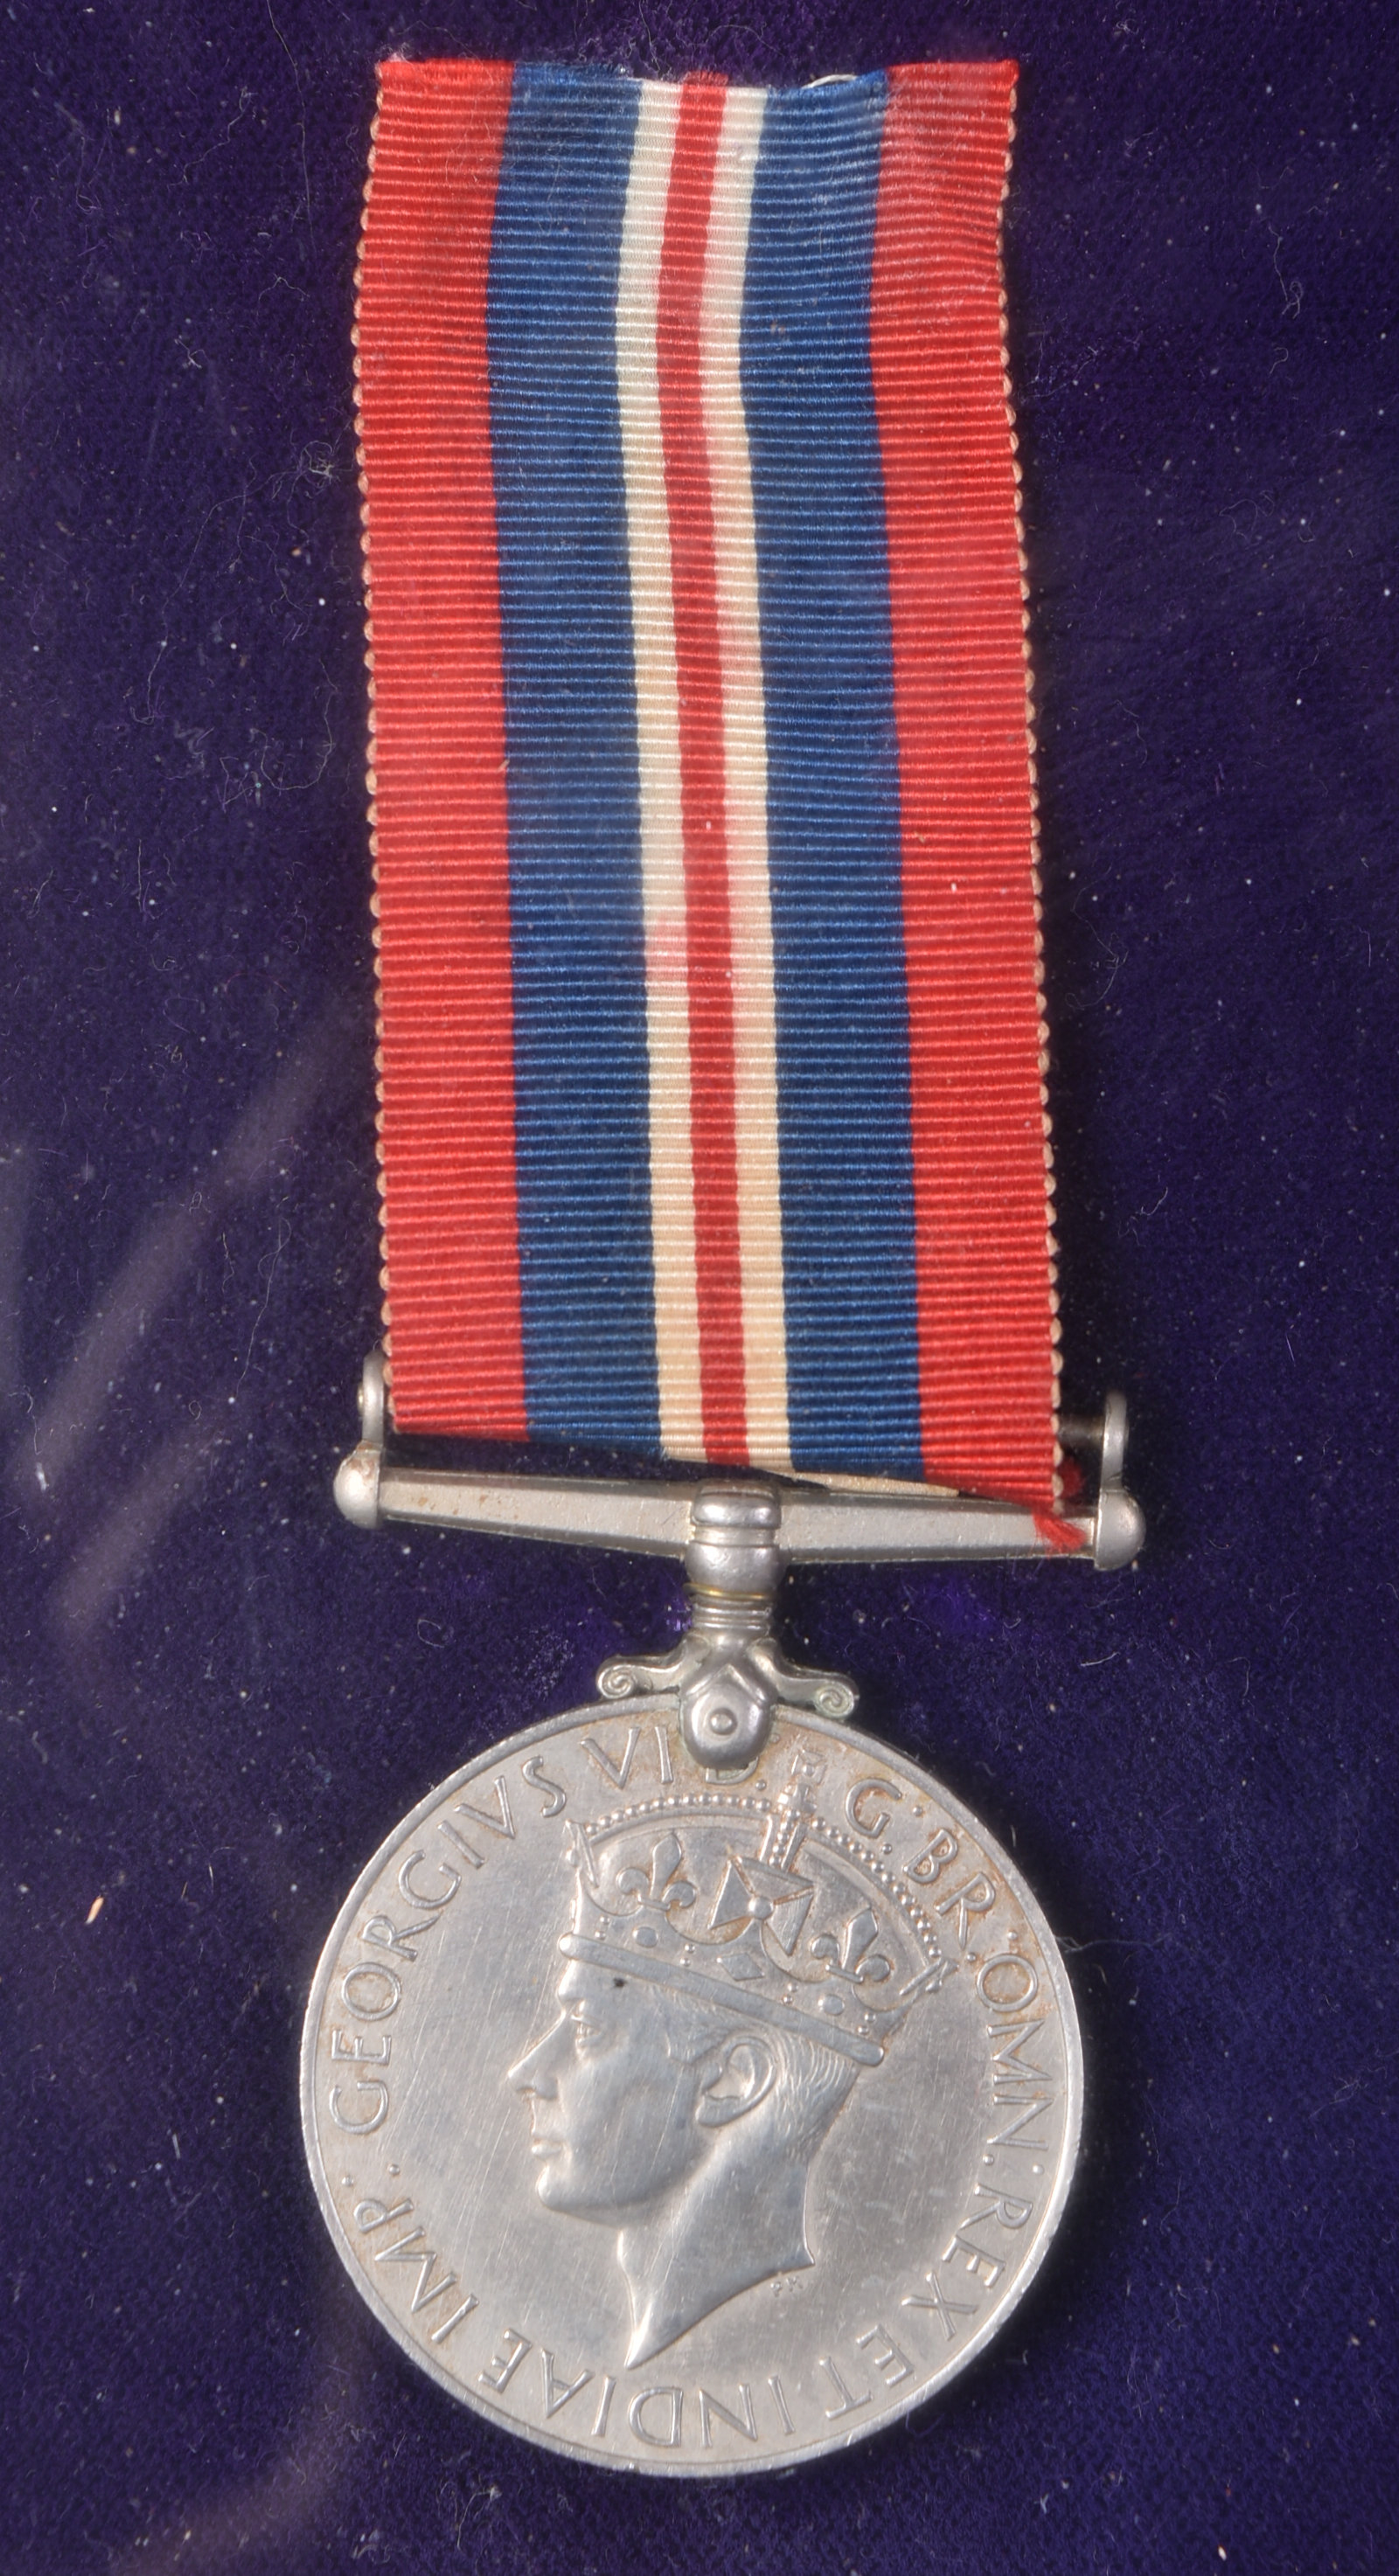 WWII SECOND WORLD WAR MEDAL TRIO - R. KELLY ROYAL NAVY - Image 3 of 8